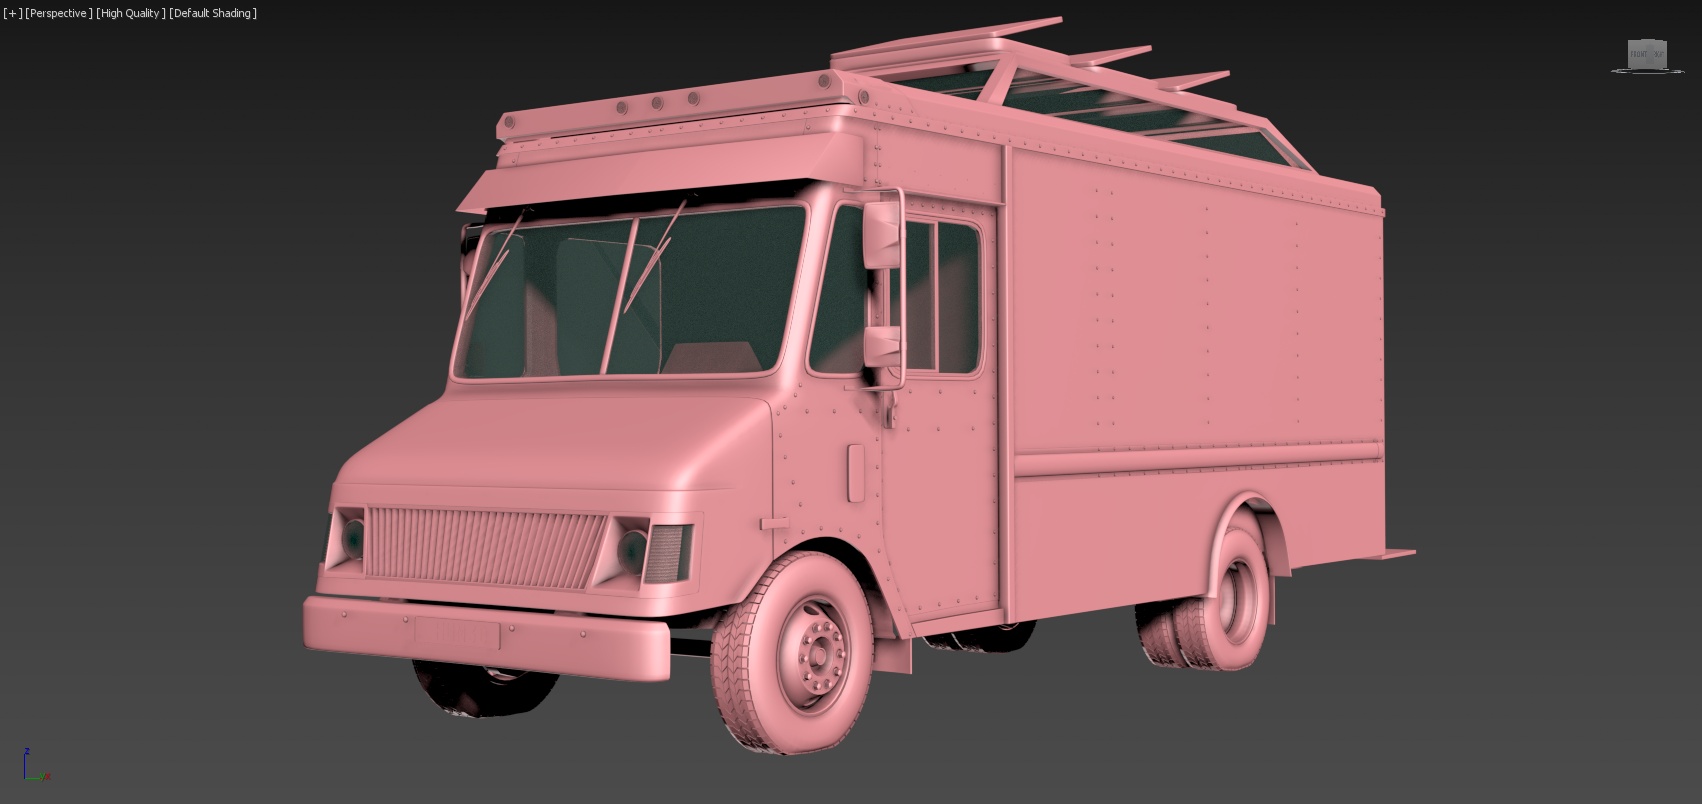 The Kitchen Witch - 1995 Chevy P30 Food Truck